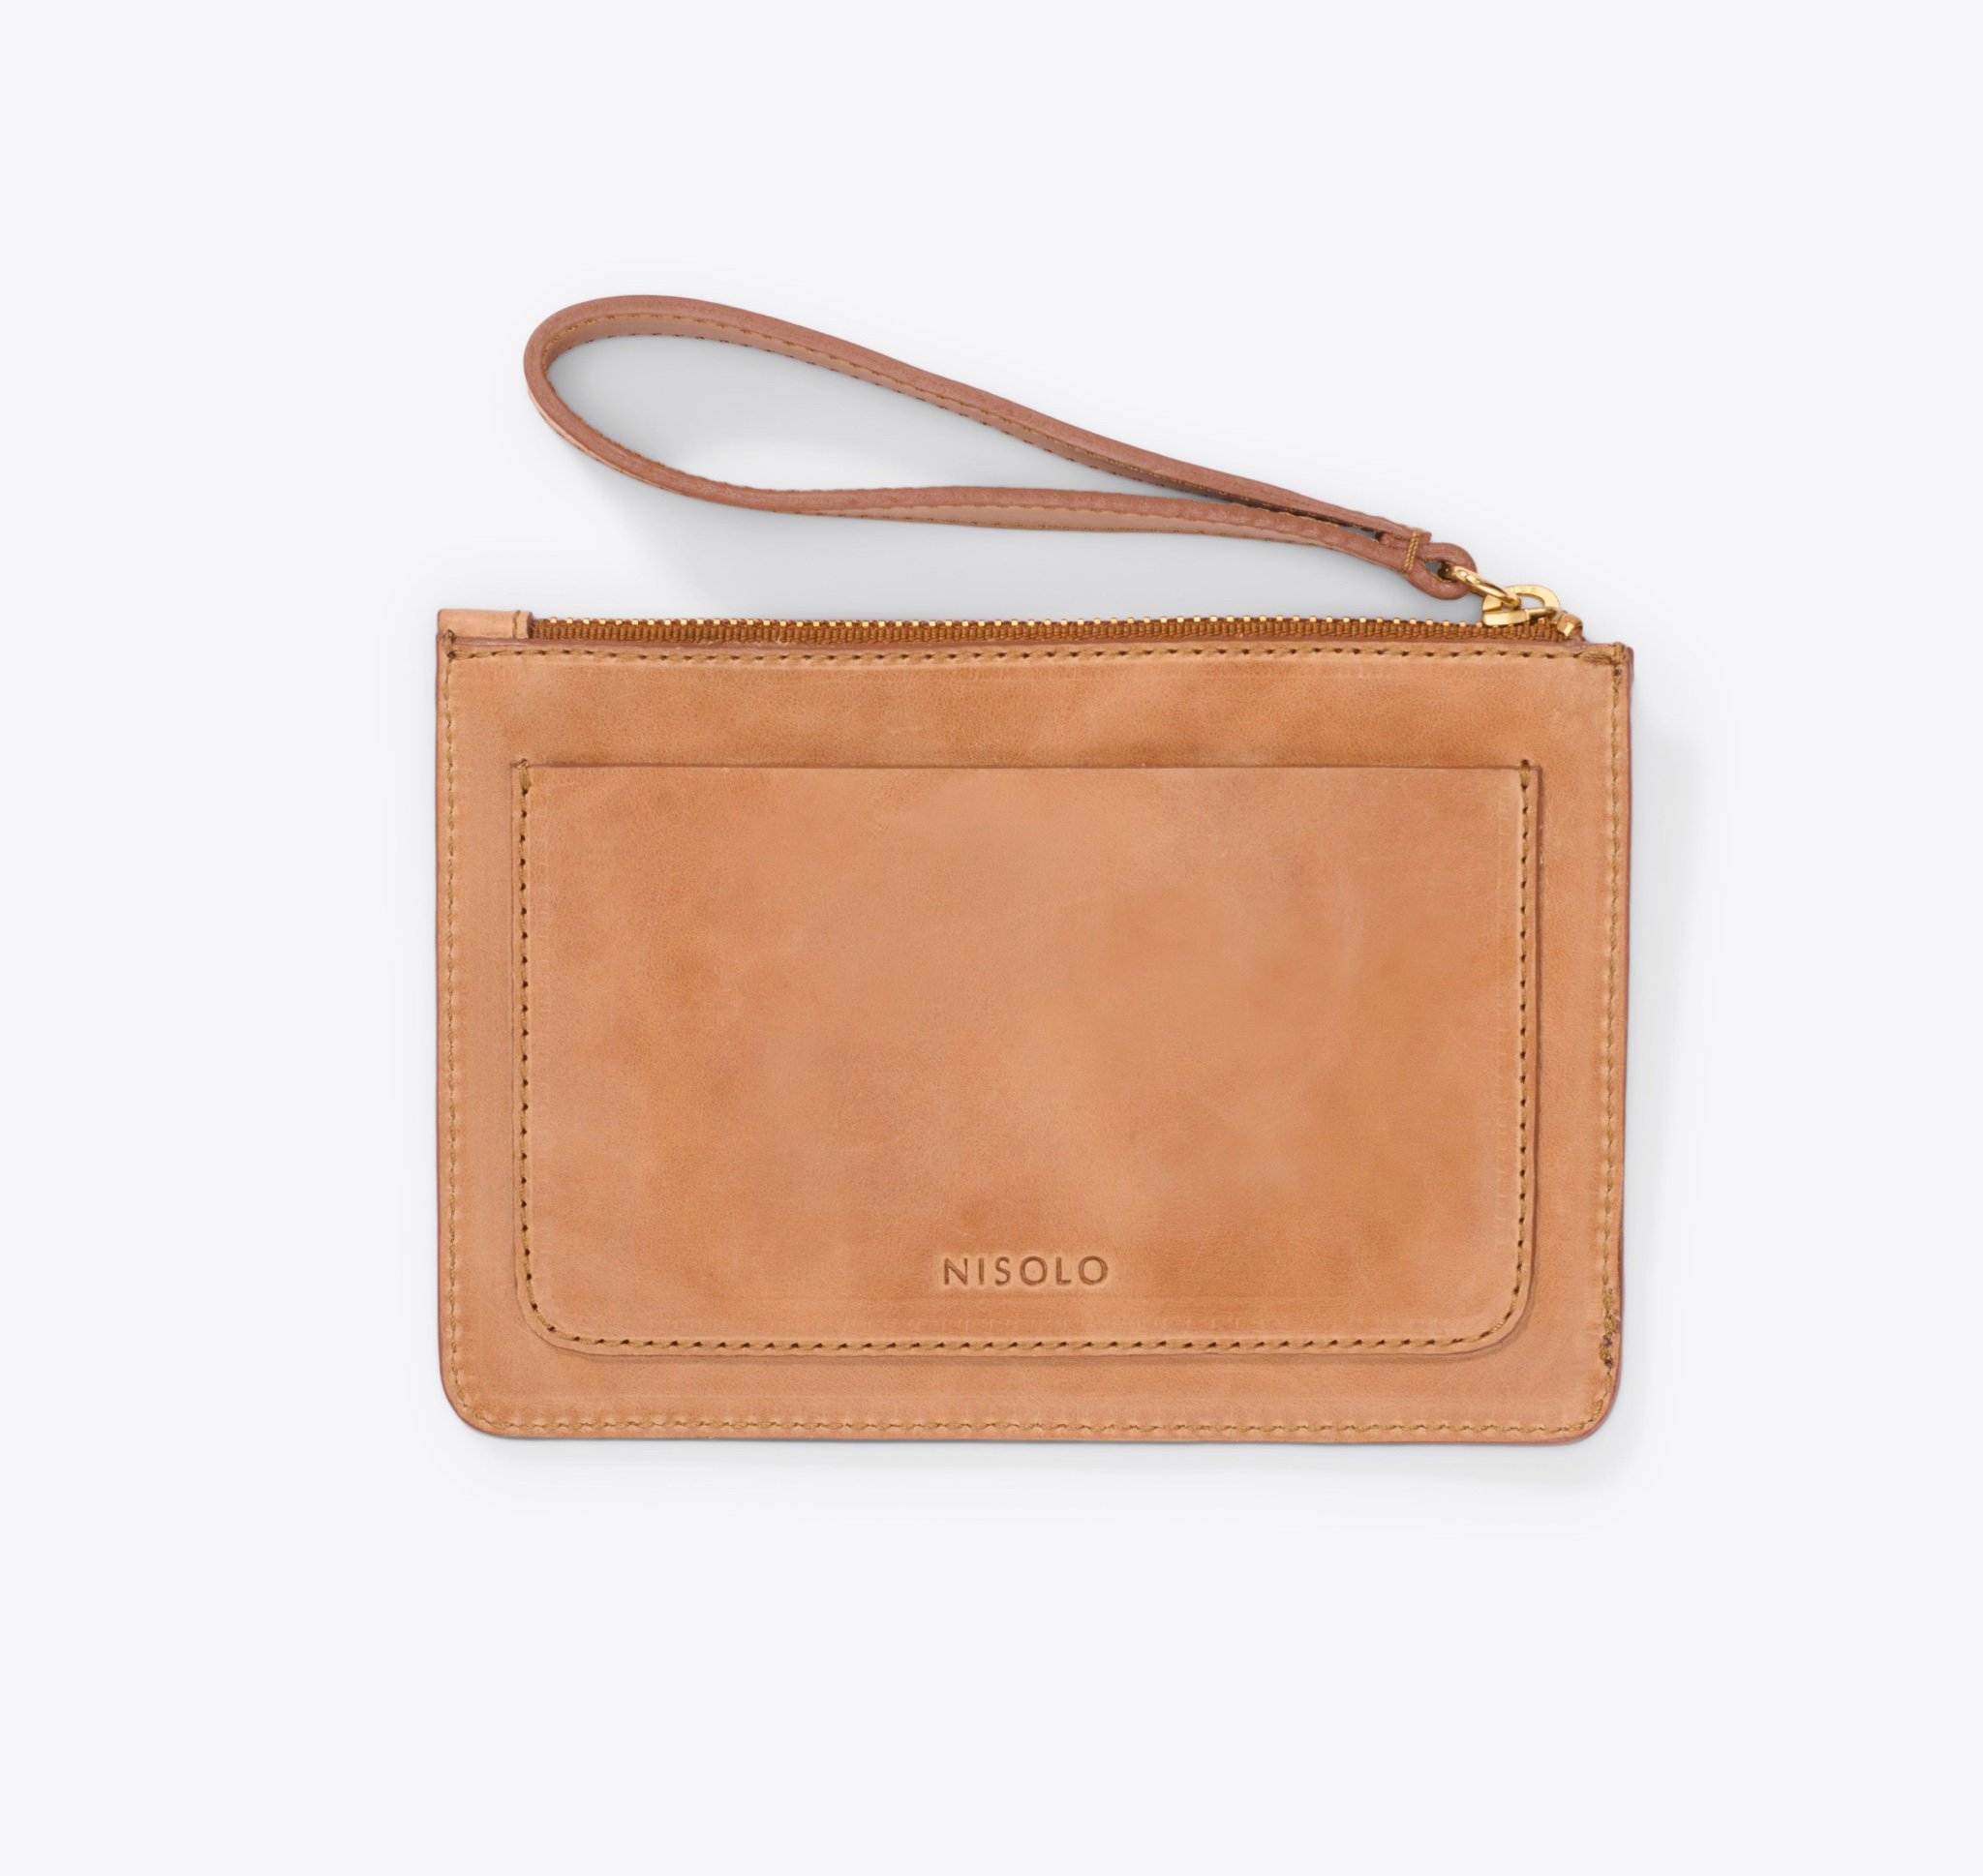 Nisolo Go-To Wristlet Clutch Almond - Every Nisolo product is built on the foundation of comfort, function, and design. 